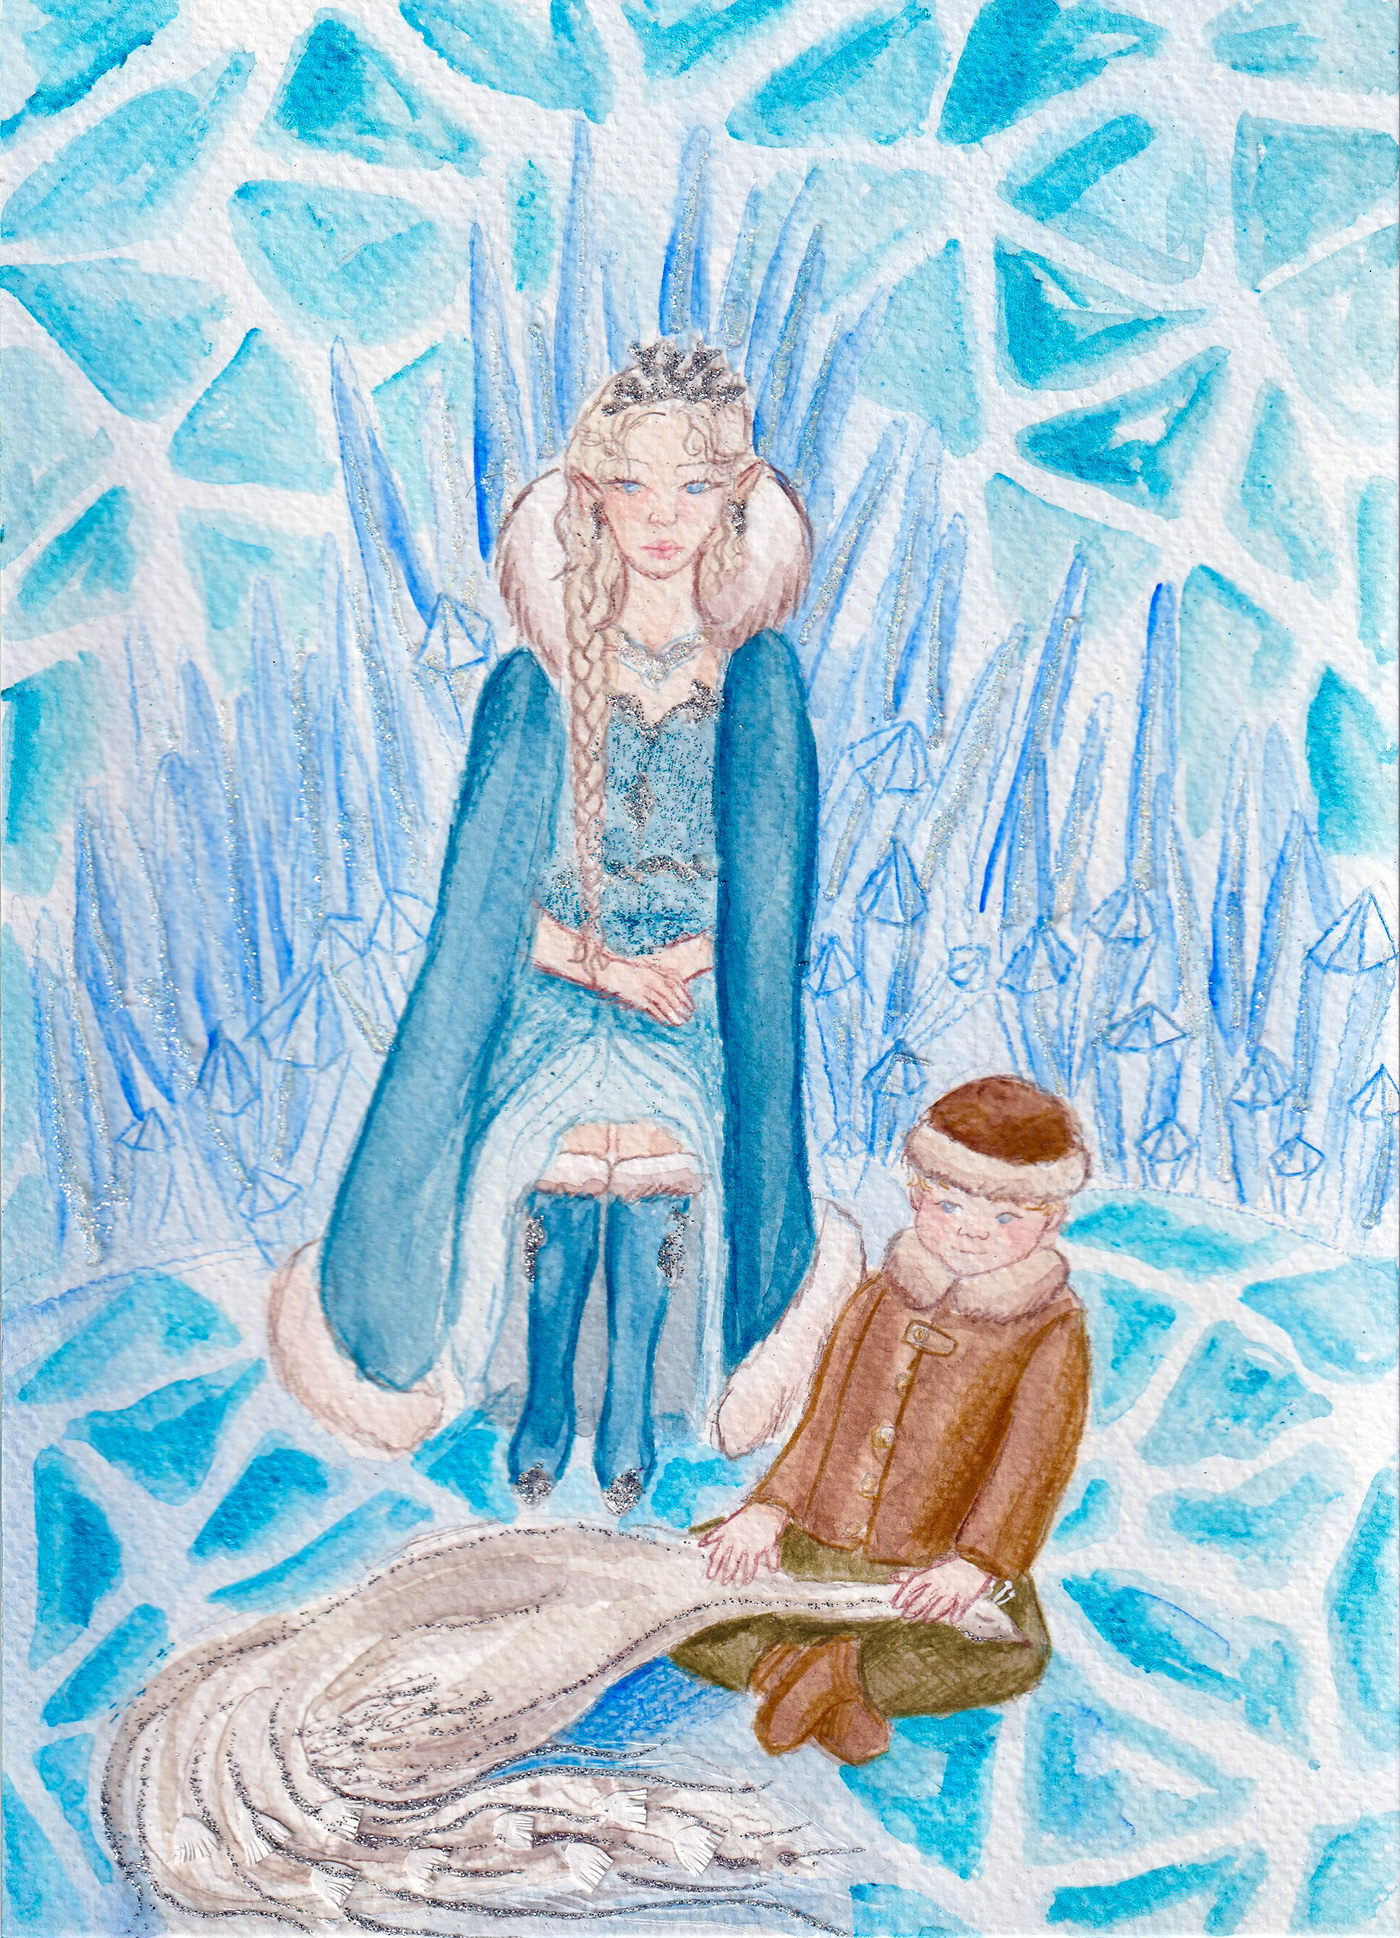 ILLUSTRATION  traditional illustration watercolor painting   artwork the snow queen snow queen Hans Christian Andersen fairy tale children's book